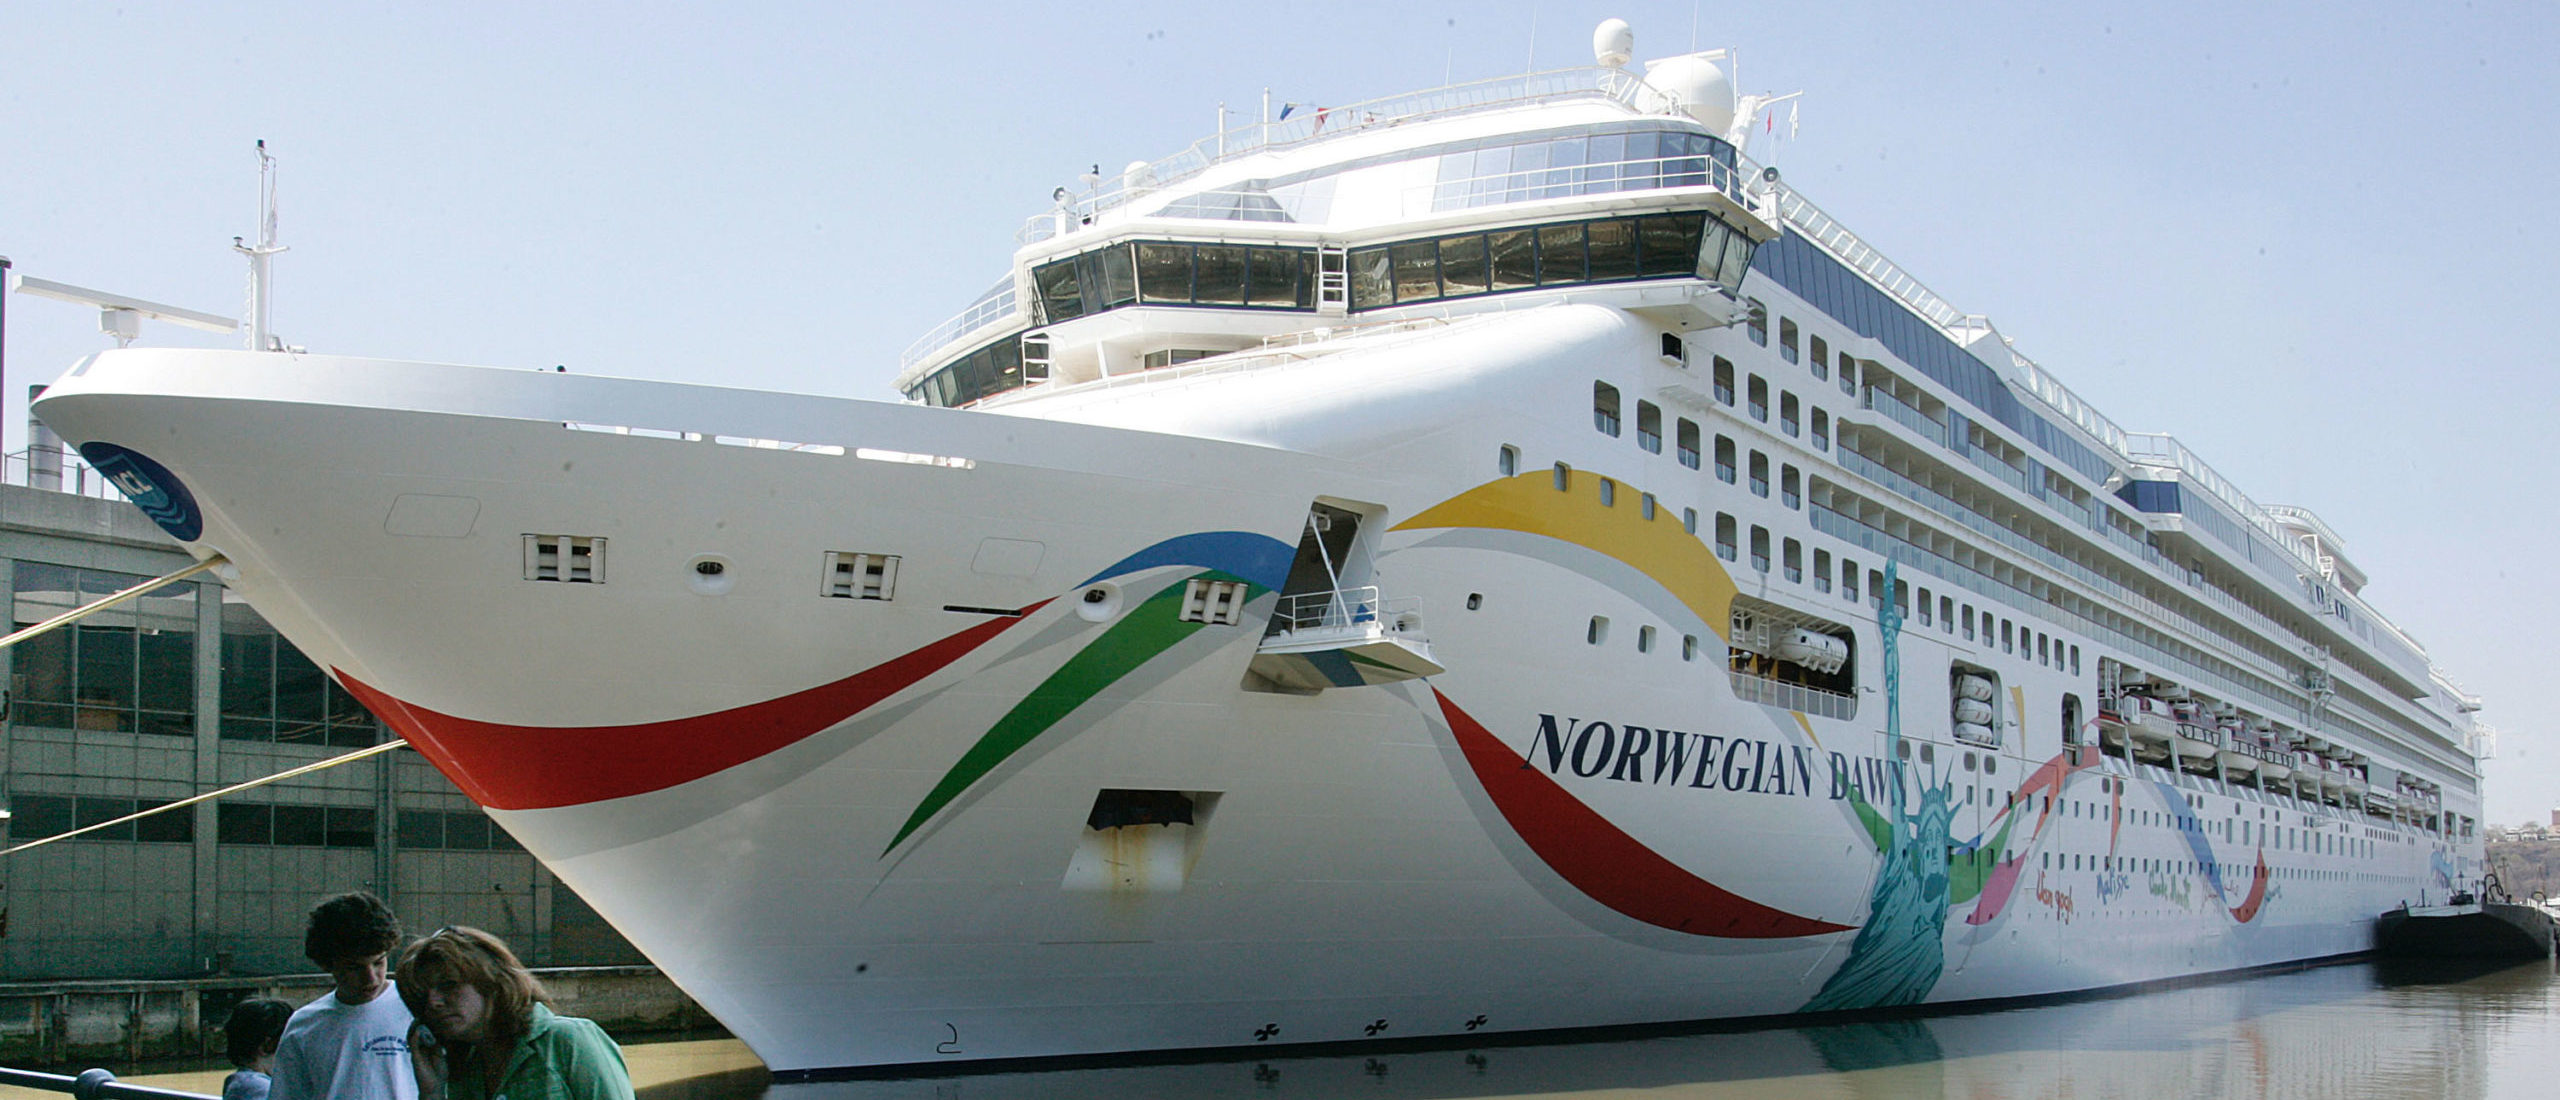 Fear Of Deadly Cholera Outbreak Left Thousands Stuck On Cruise Ship. Liner Now Allowed To Dock